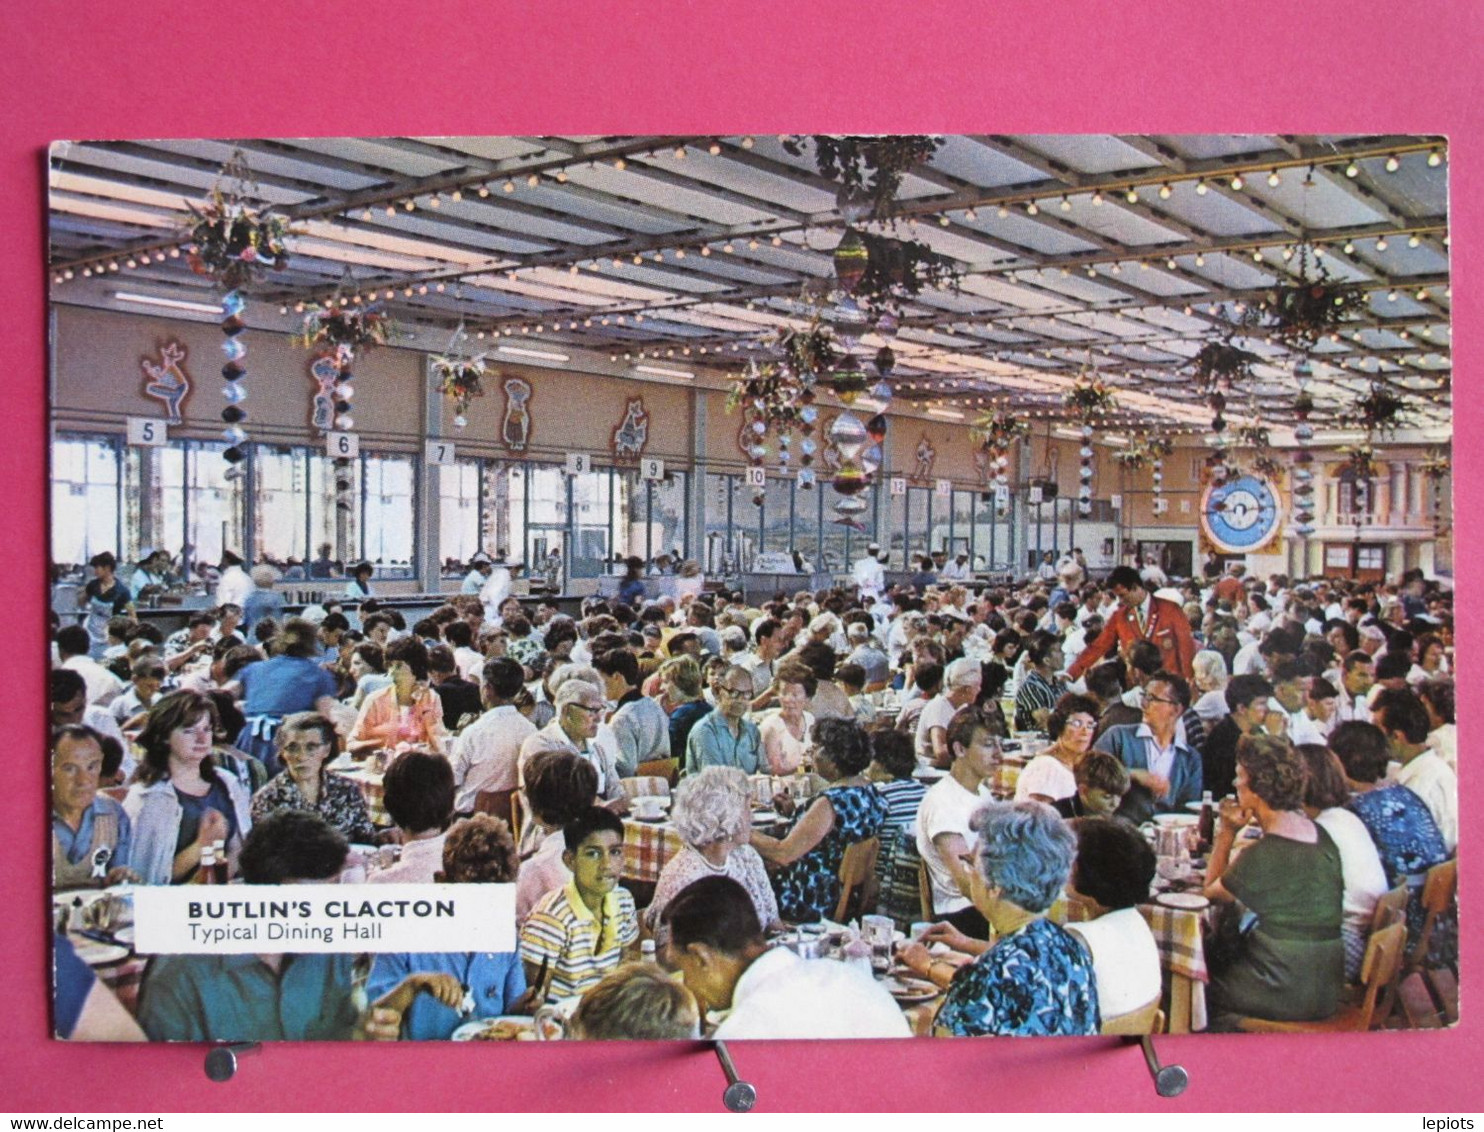 Visuel Très Peu Courant - Angleterre - Butlin's Clacton - Typical Dining Hall - R/verso - Clacton On Sea